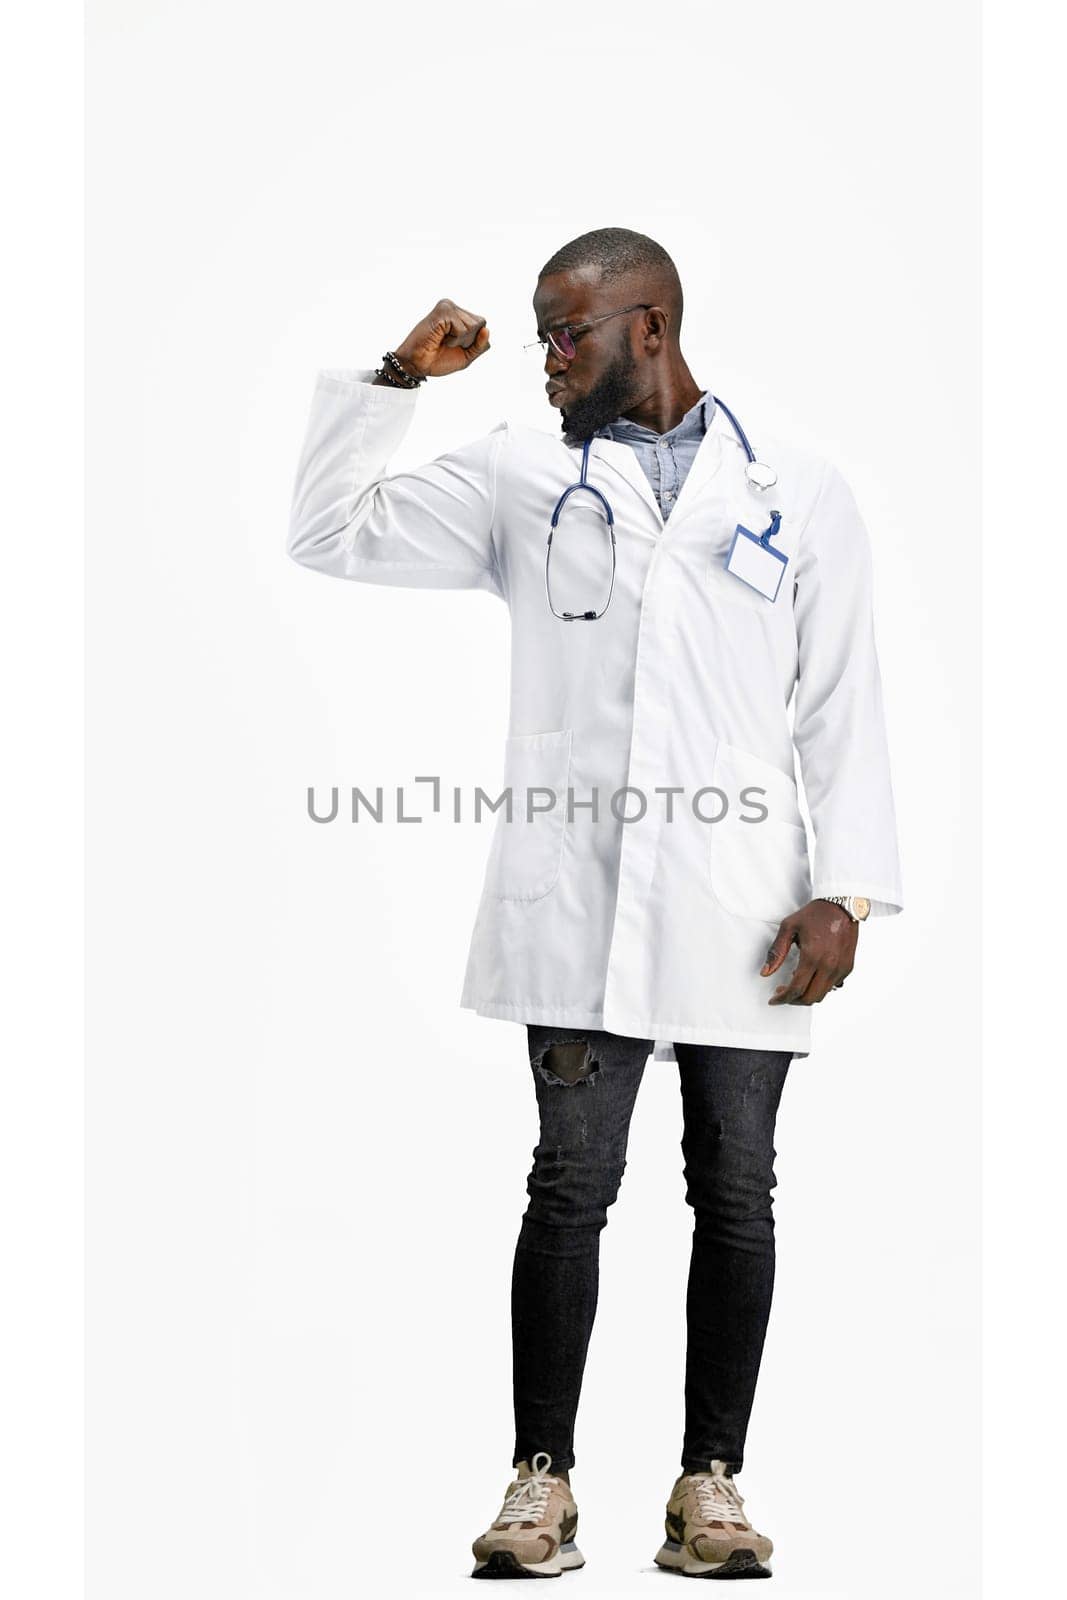 The doctor, in full height, on a white background, shows strength by Prosto